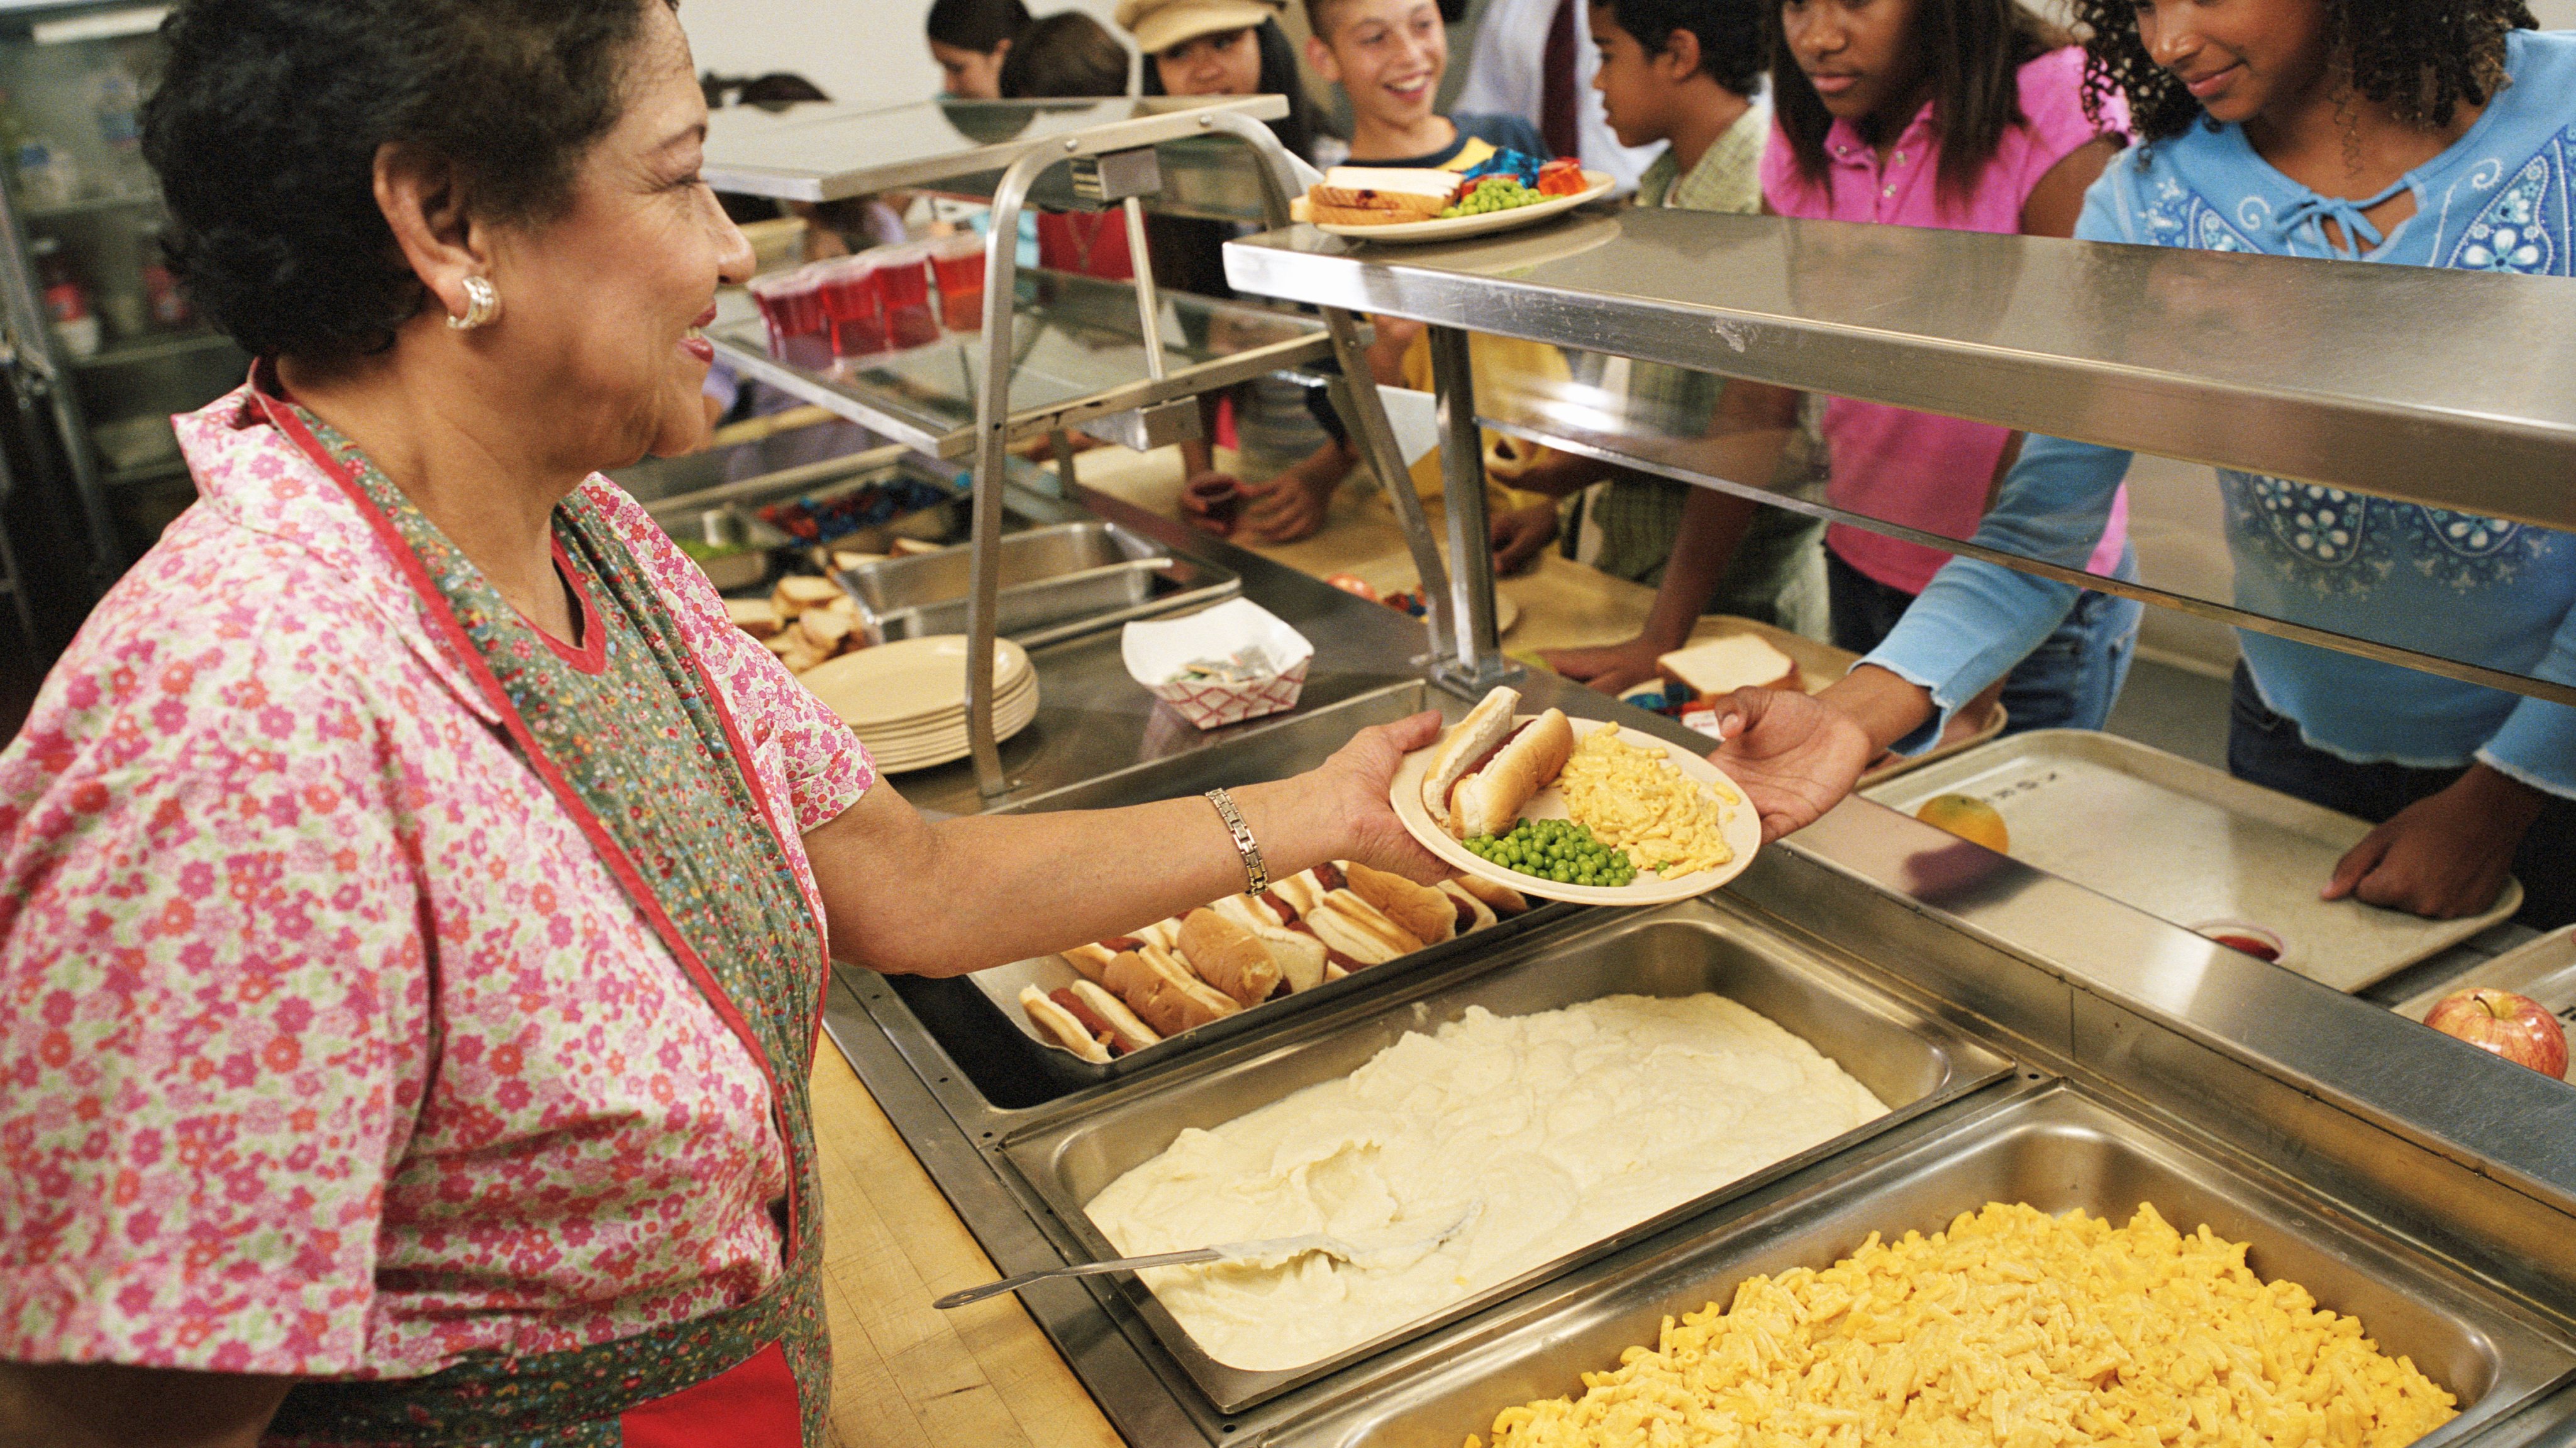 Mature woman serving food to students (12-14) in cafeteria